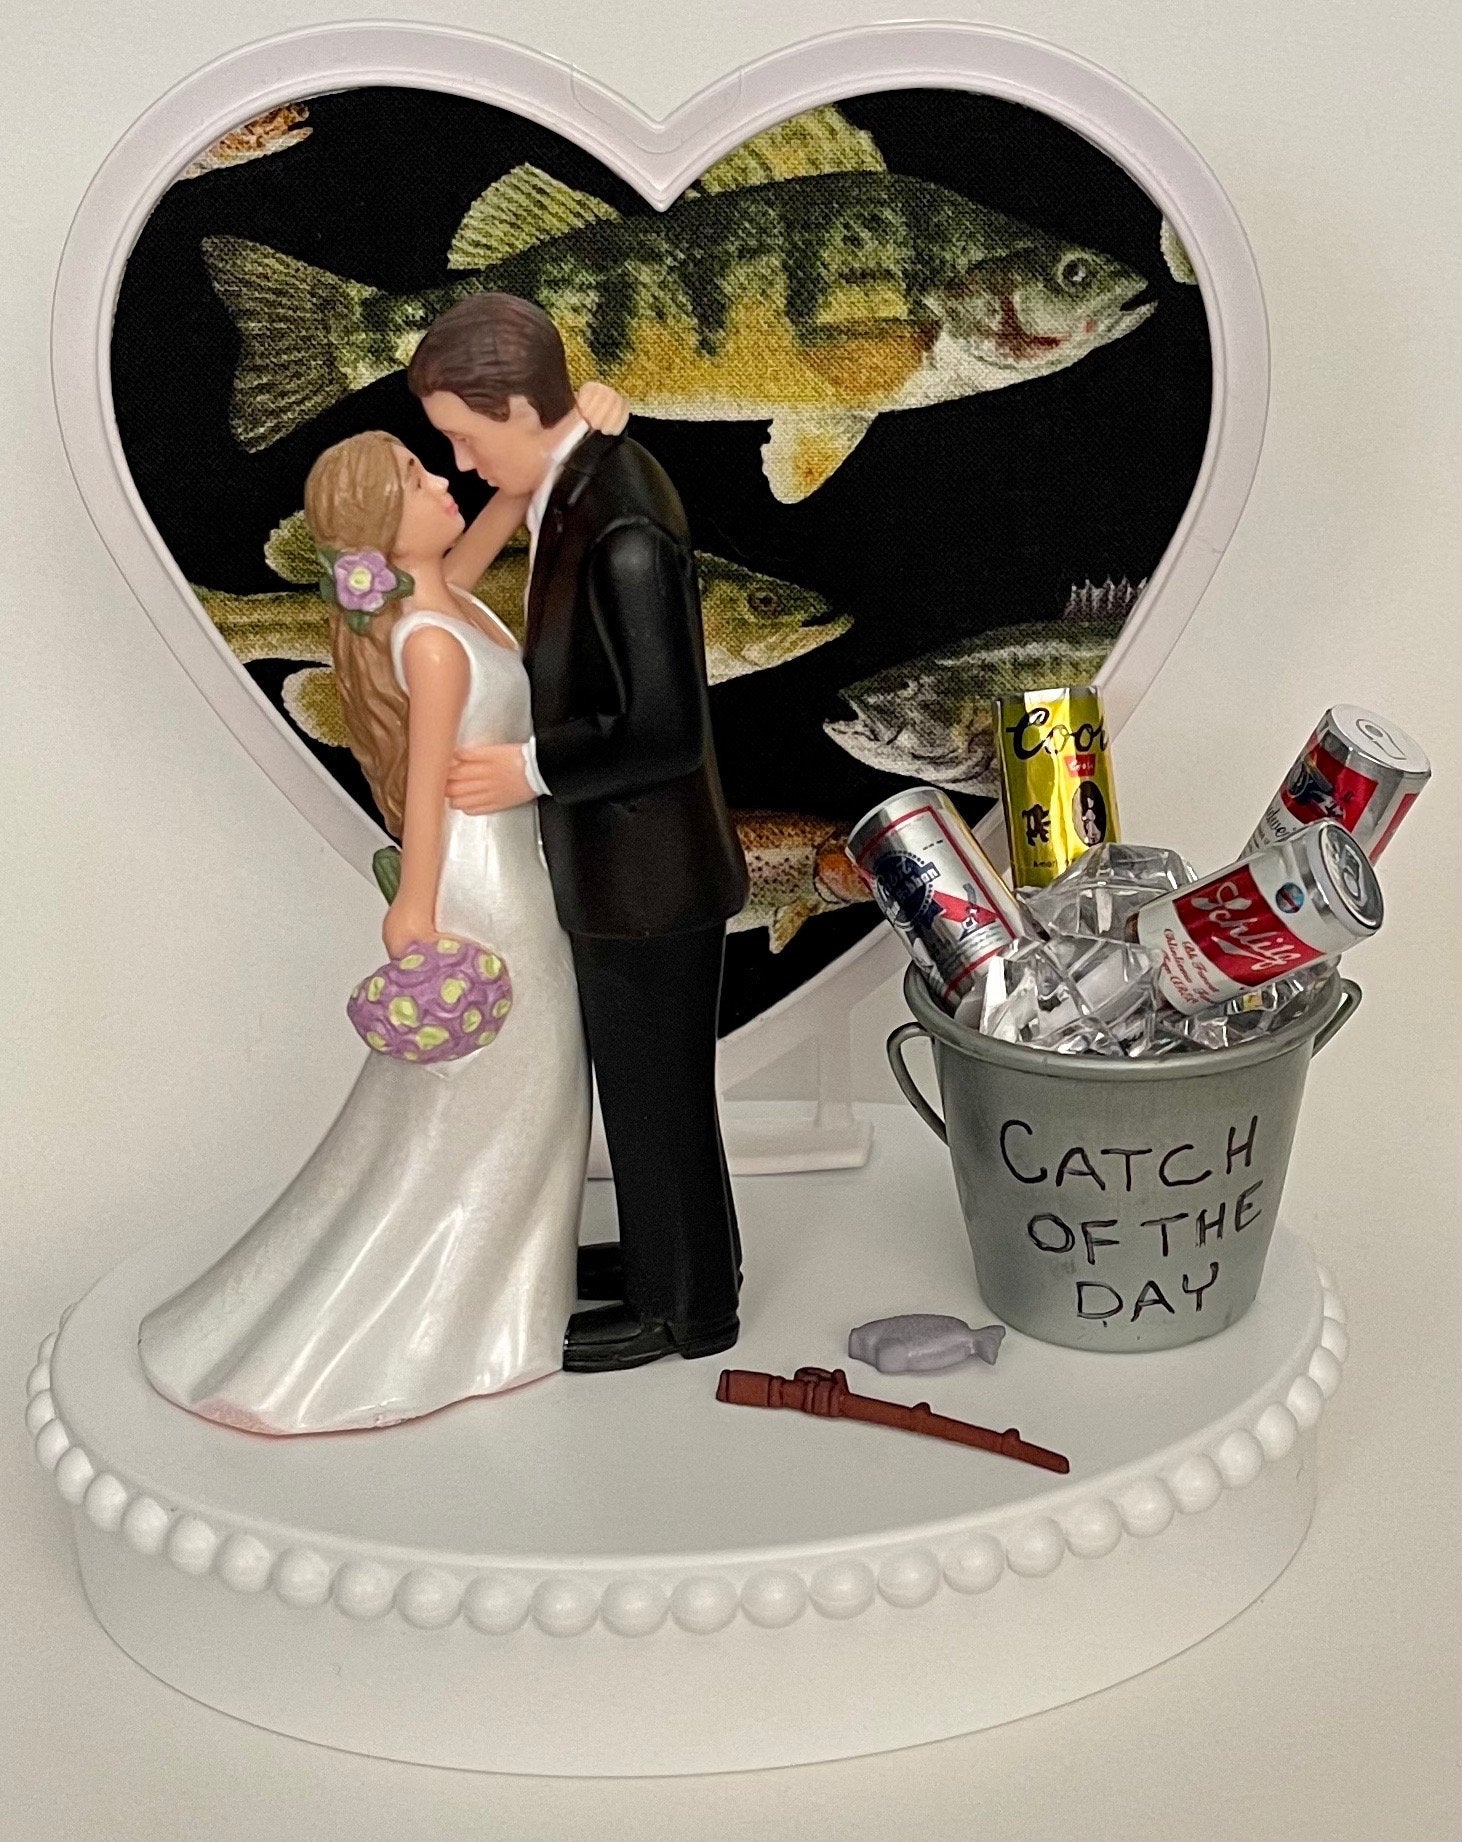 Wedding Cake Topper Catch of the Day Fishing and Beer Themed Gorgeous Long-Haired Bride Groom Bridal Shower Gift Unique Groom's Cake Top